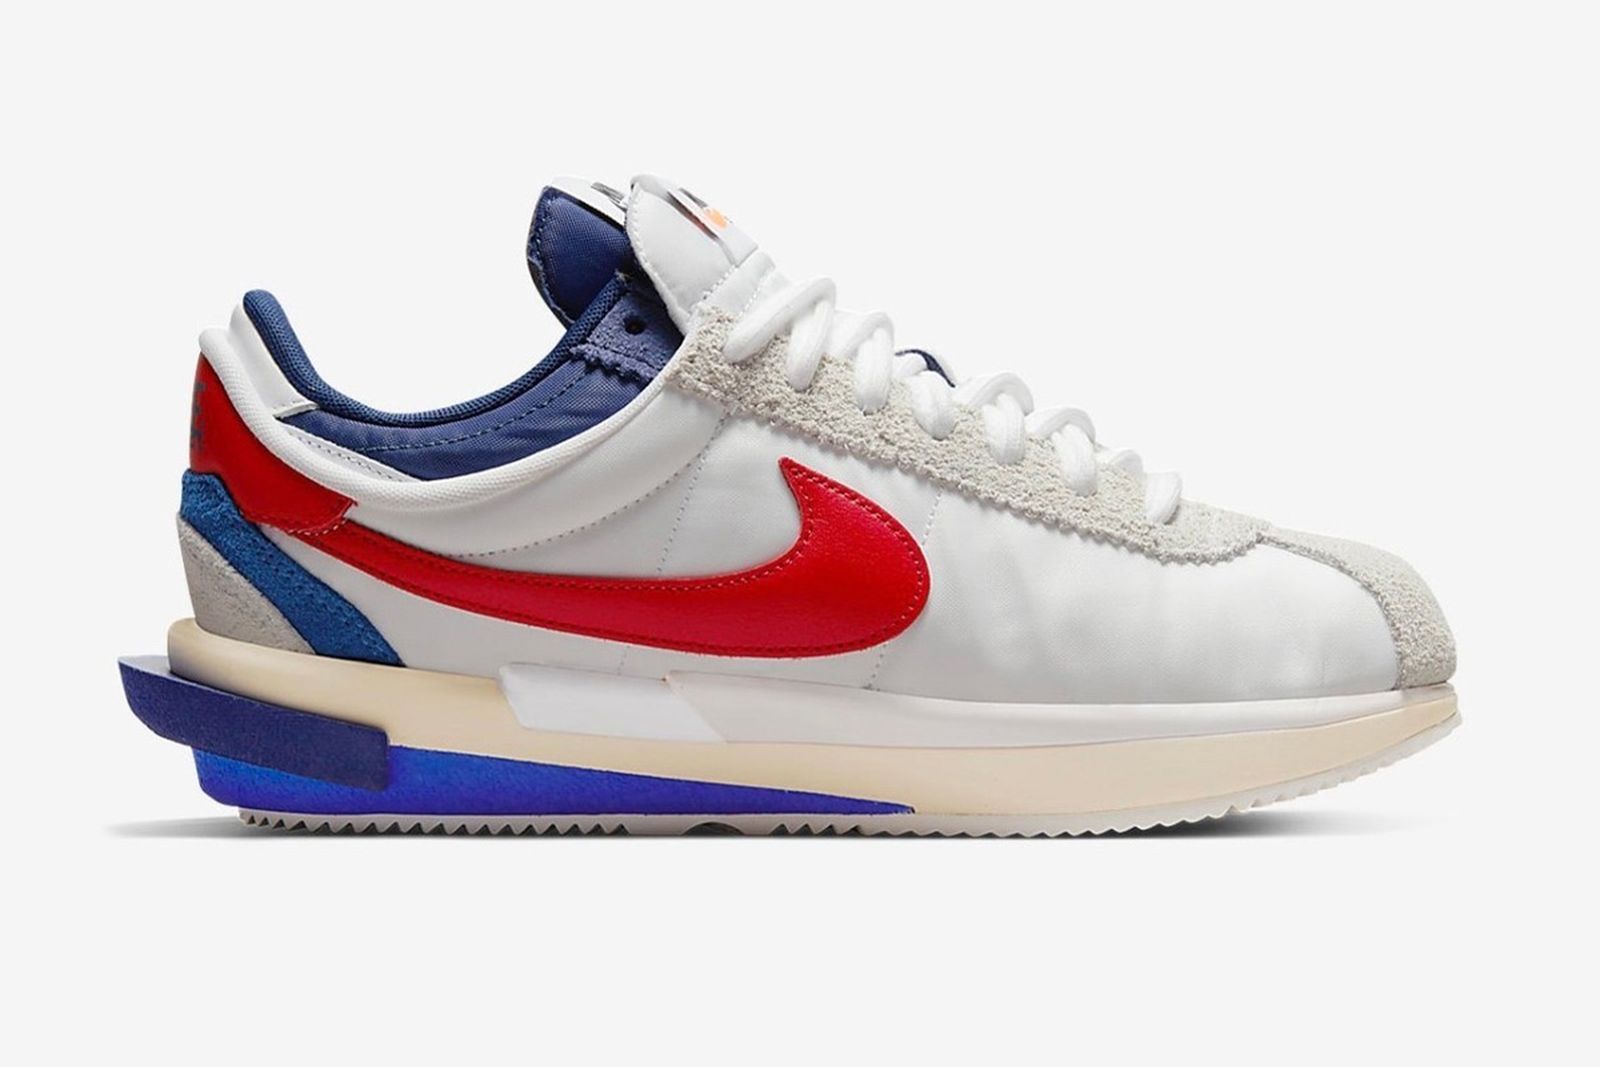 sacai x Nike Cortez 4.0 Official Look: Release Date, Price